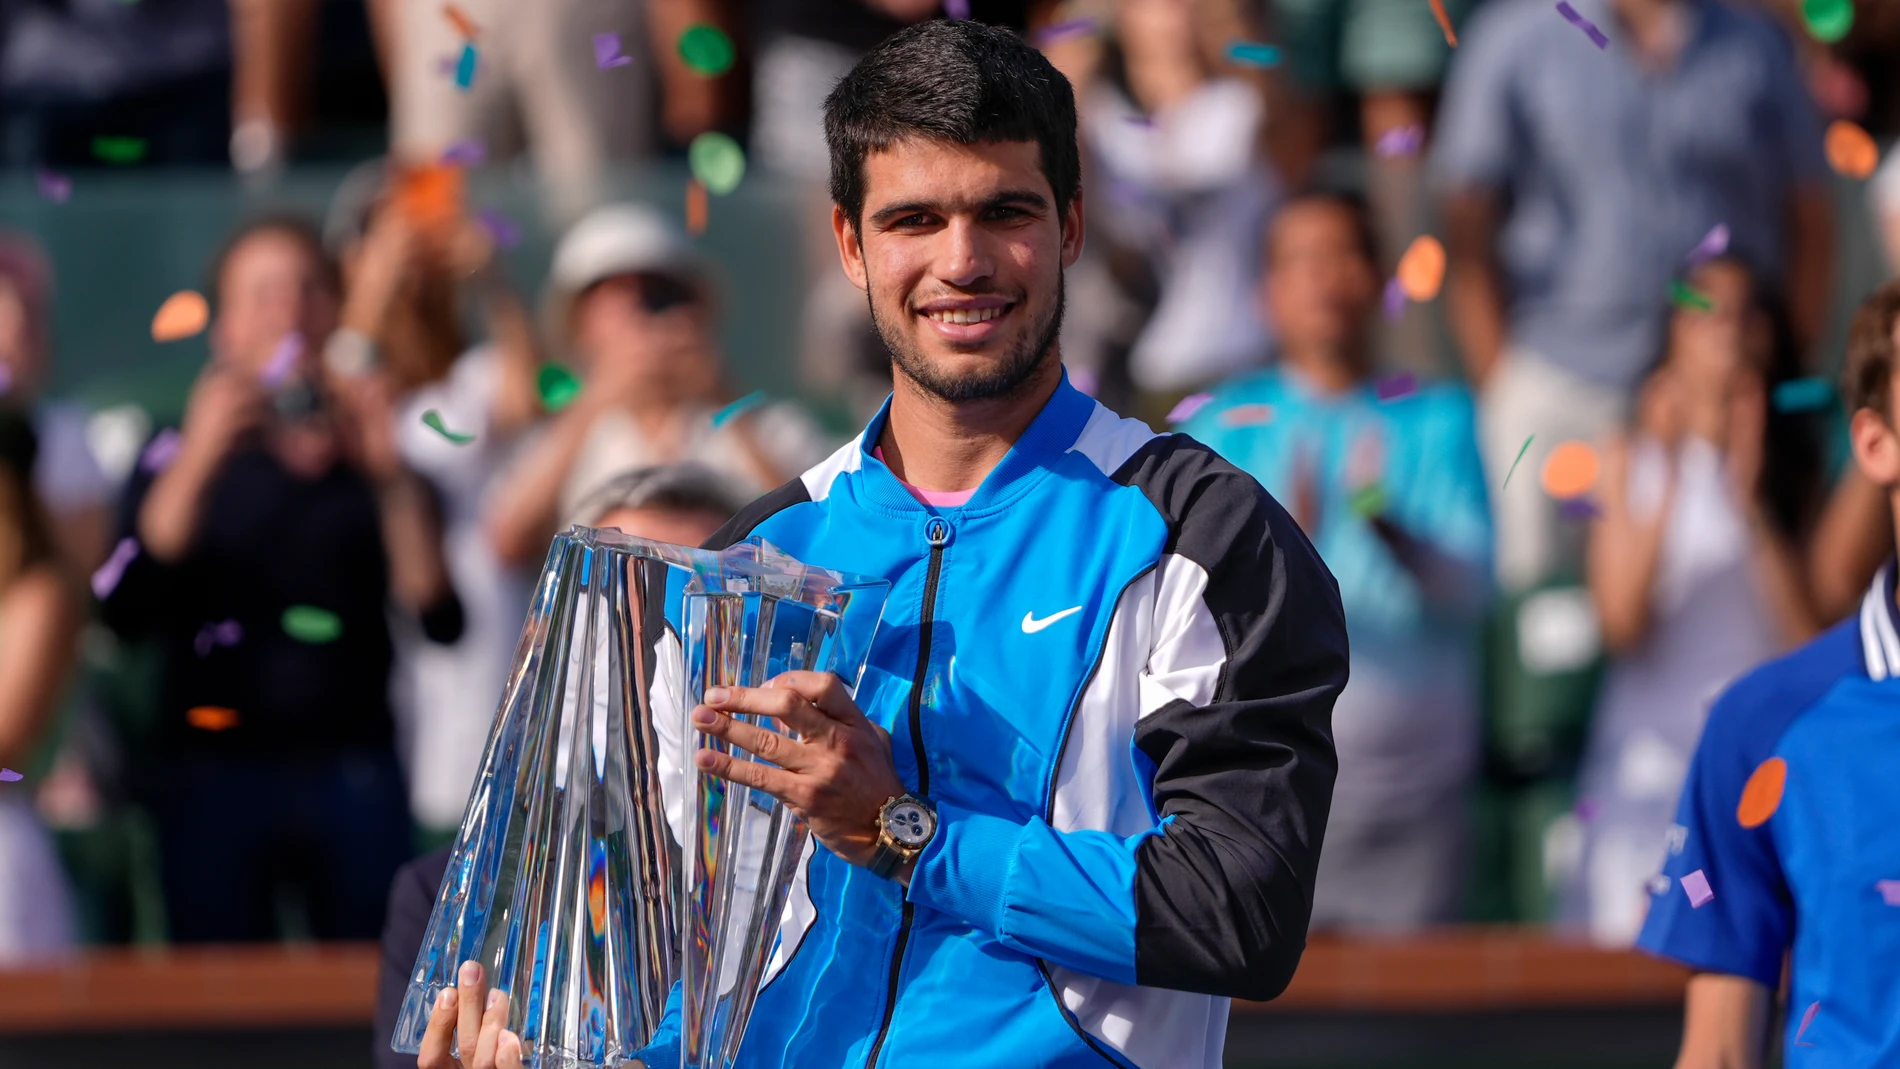 Carlos Alcaraz, of Spain, holds the trophy after defeating Daniil Medvedev, of Russia, in the final match at the BNP Paribas Open tennis tournament, Sunday, March 17, 2024, in Indian Wells, Calif. (AP Photo/Ryan Sun)